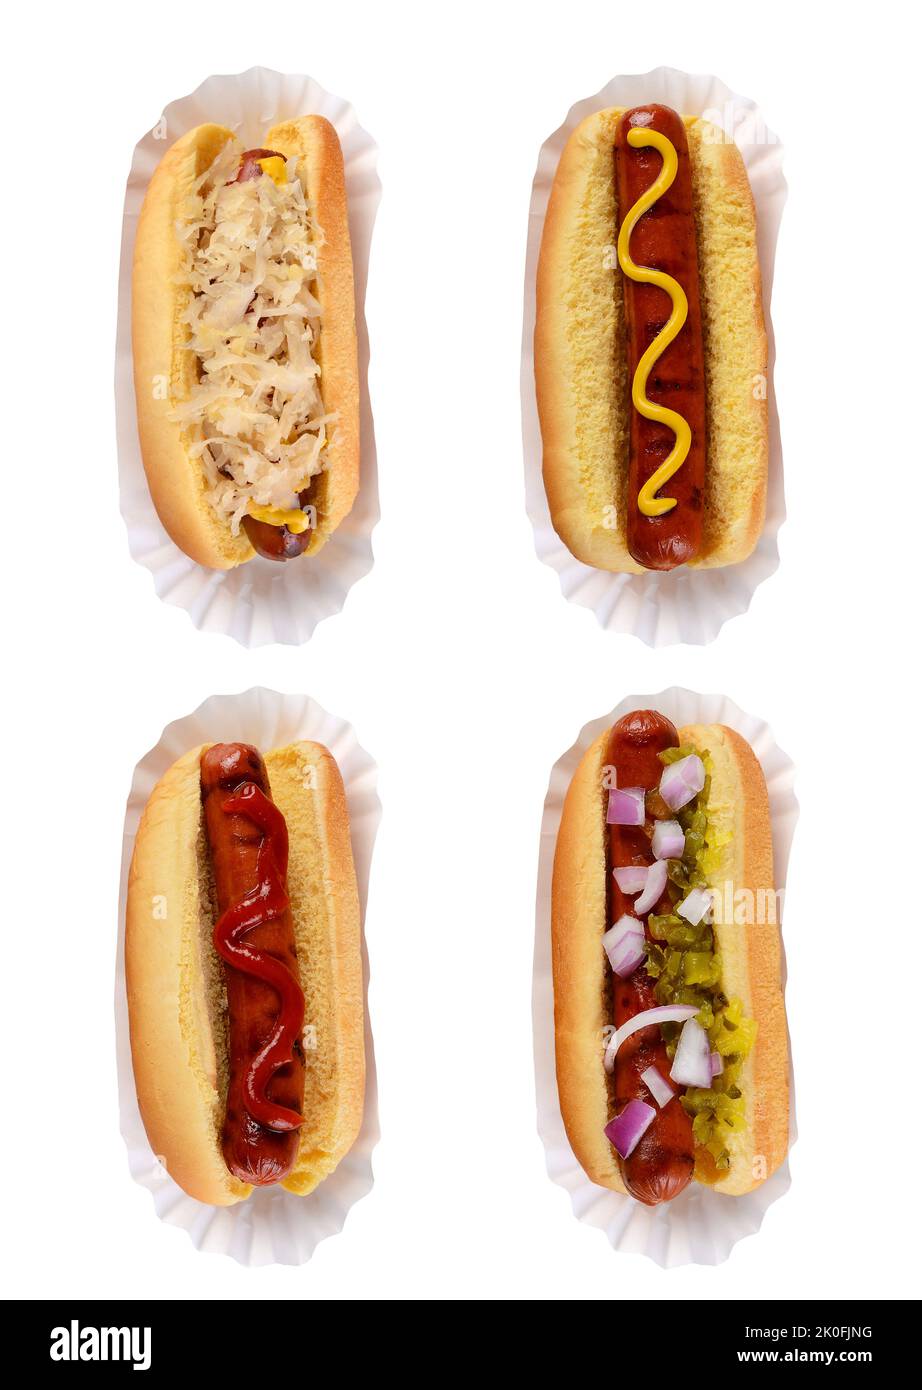 Four different hotdogs on paper holders with different condiment toppings isolated on white. Stock Photo